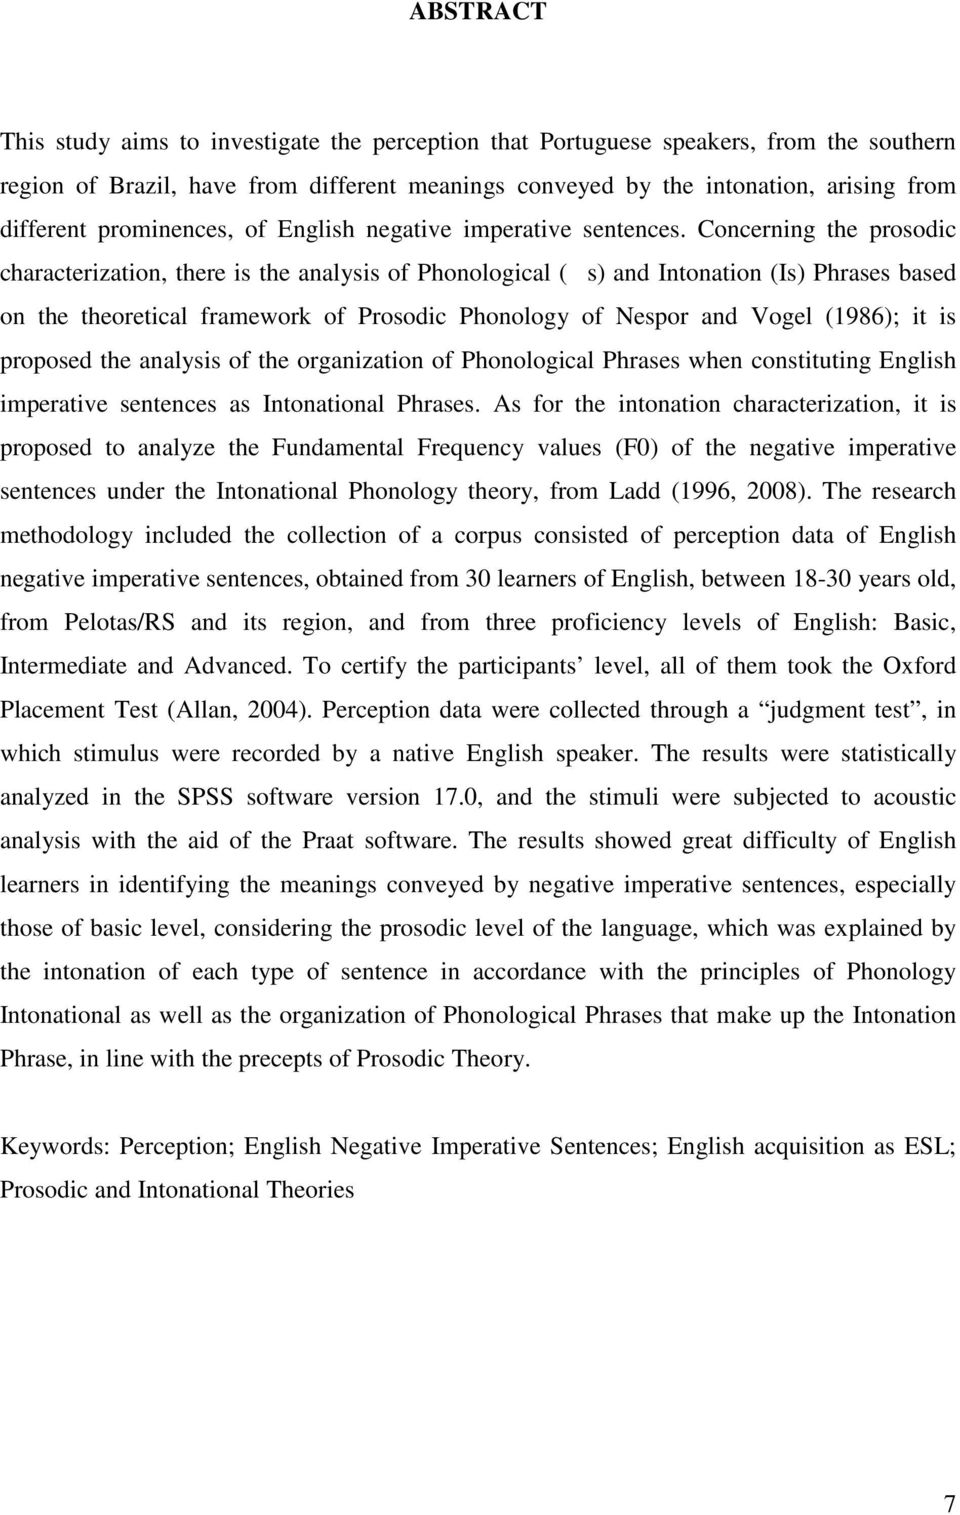 Concerning the prosodic characterization, there is the analysis of Phonological (s) and Intonation (Is) Phrases based on the theoretical framework of Prosodic Phonology of Nespor and Vogel (1986); it